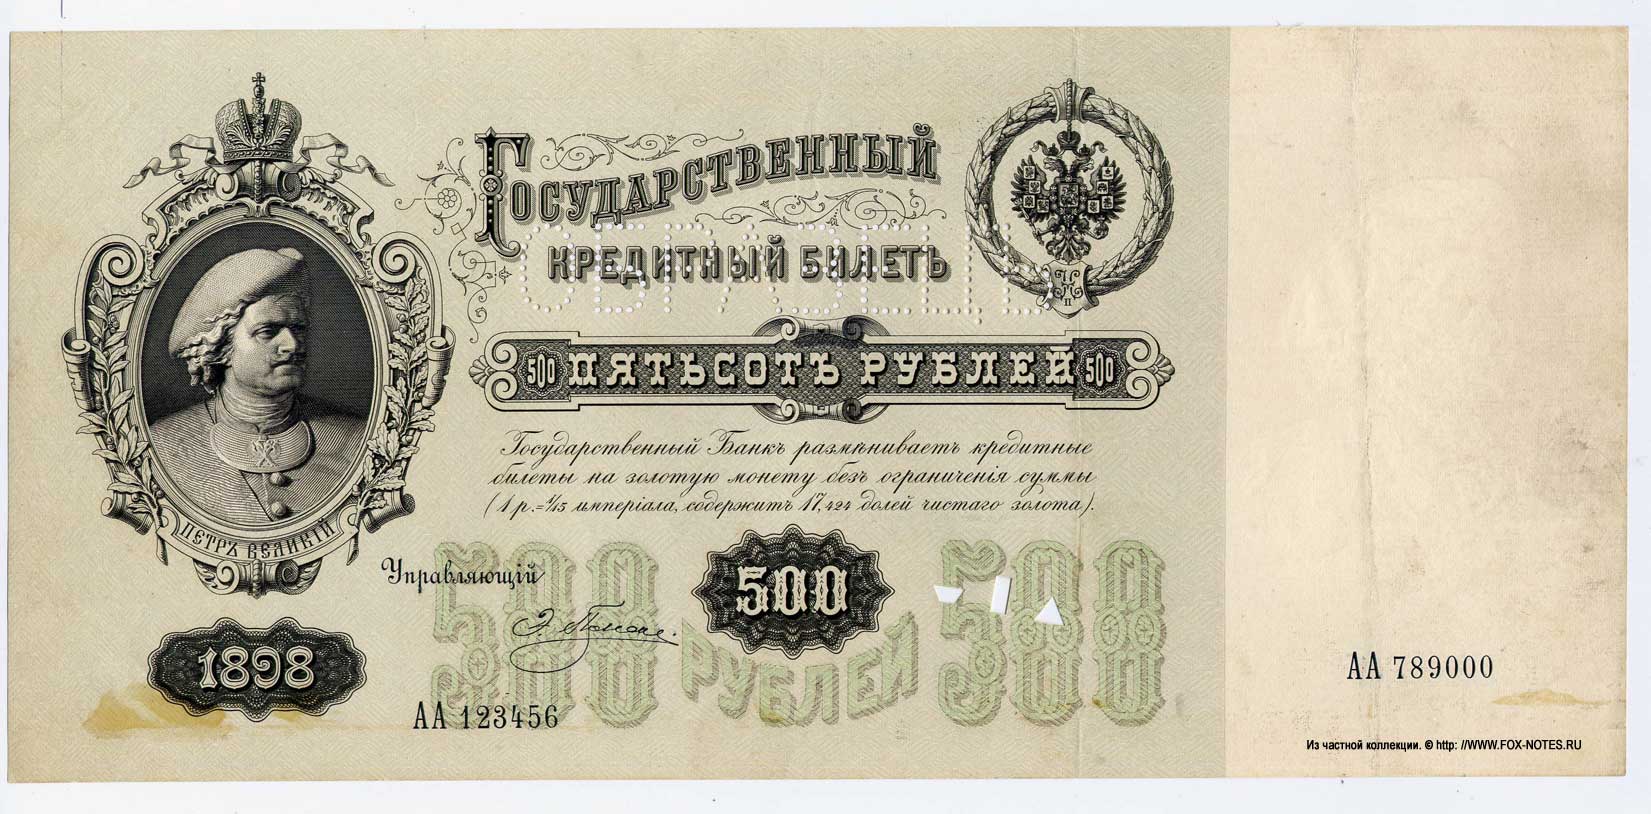 Russian Empire State Credit bank note 500 rubles 1898 - SPECIMEN